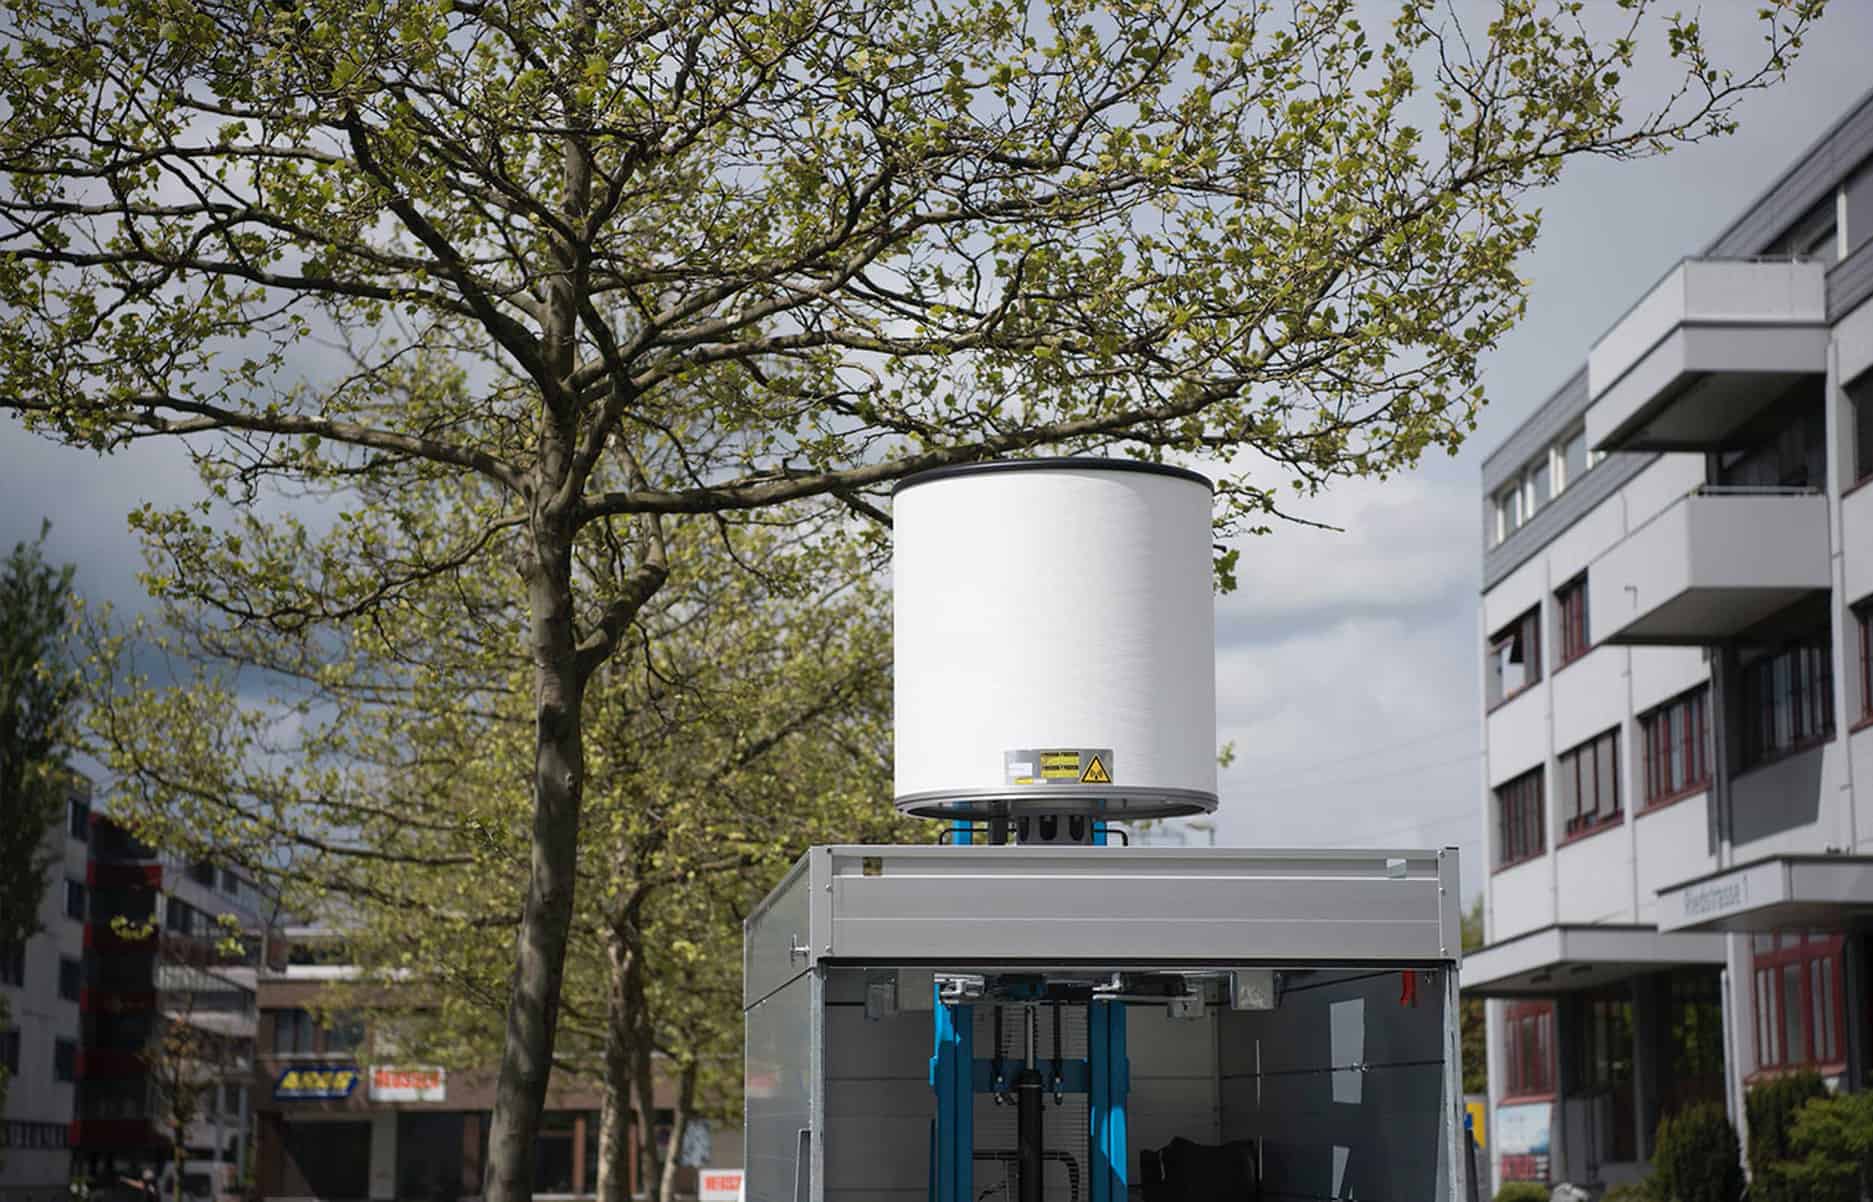 ELVIRA drone detection radar installed outside office buildings as part of Project Meritis